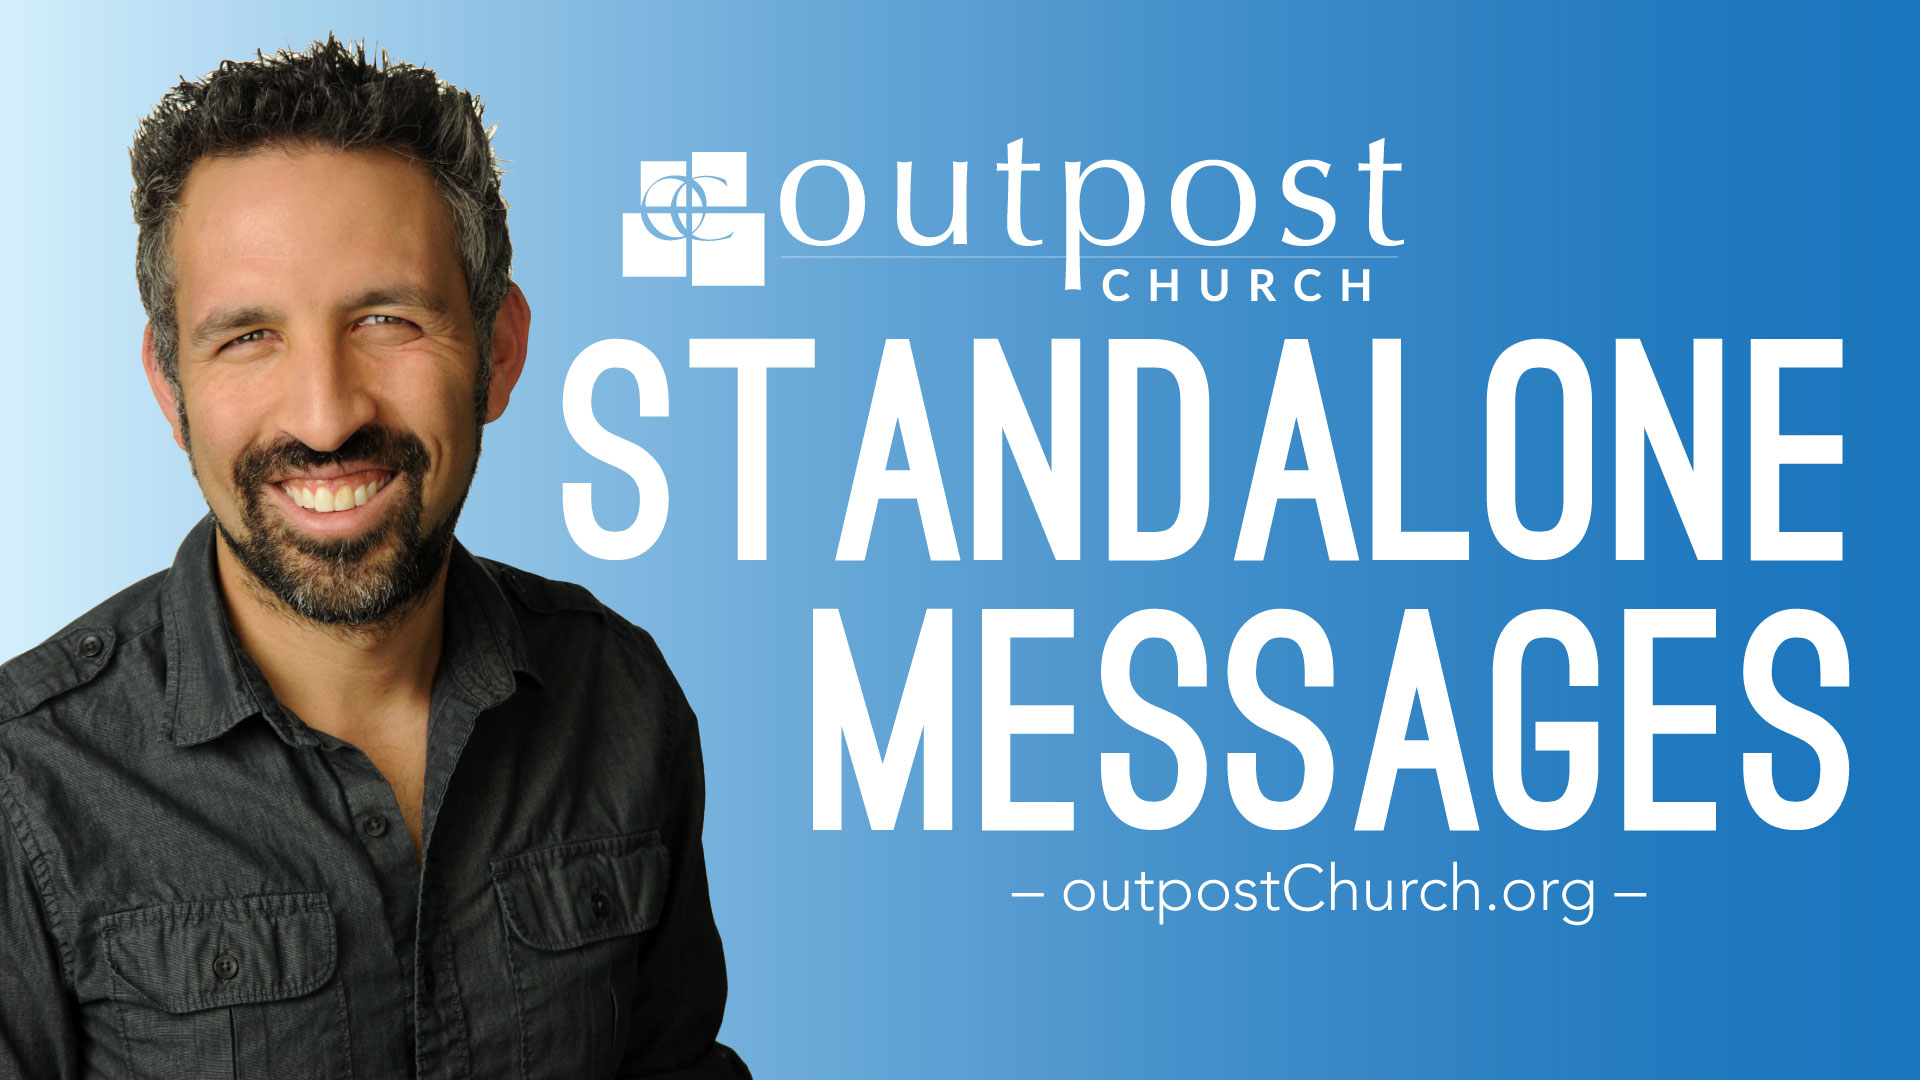 Artwork for podcast Outpost Church Messages Podcast